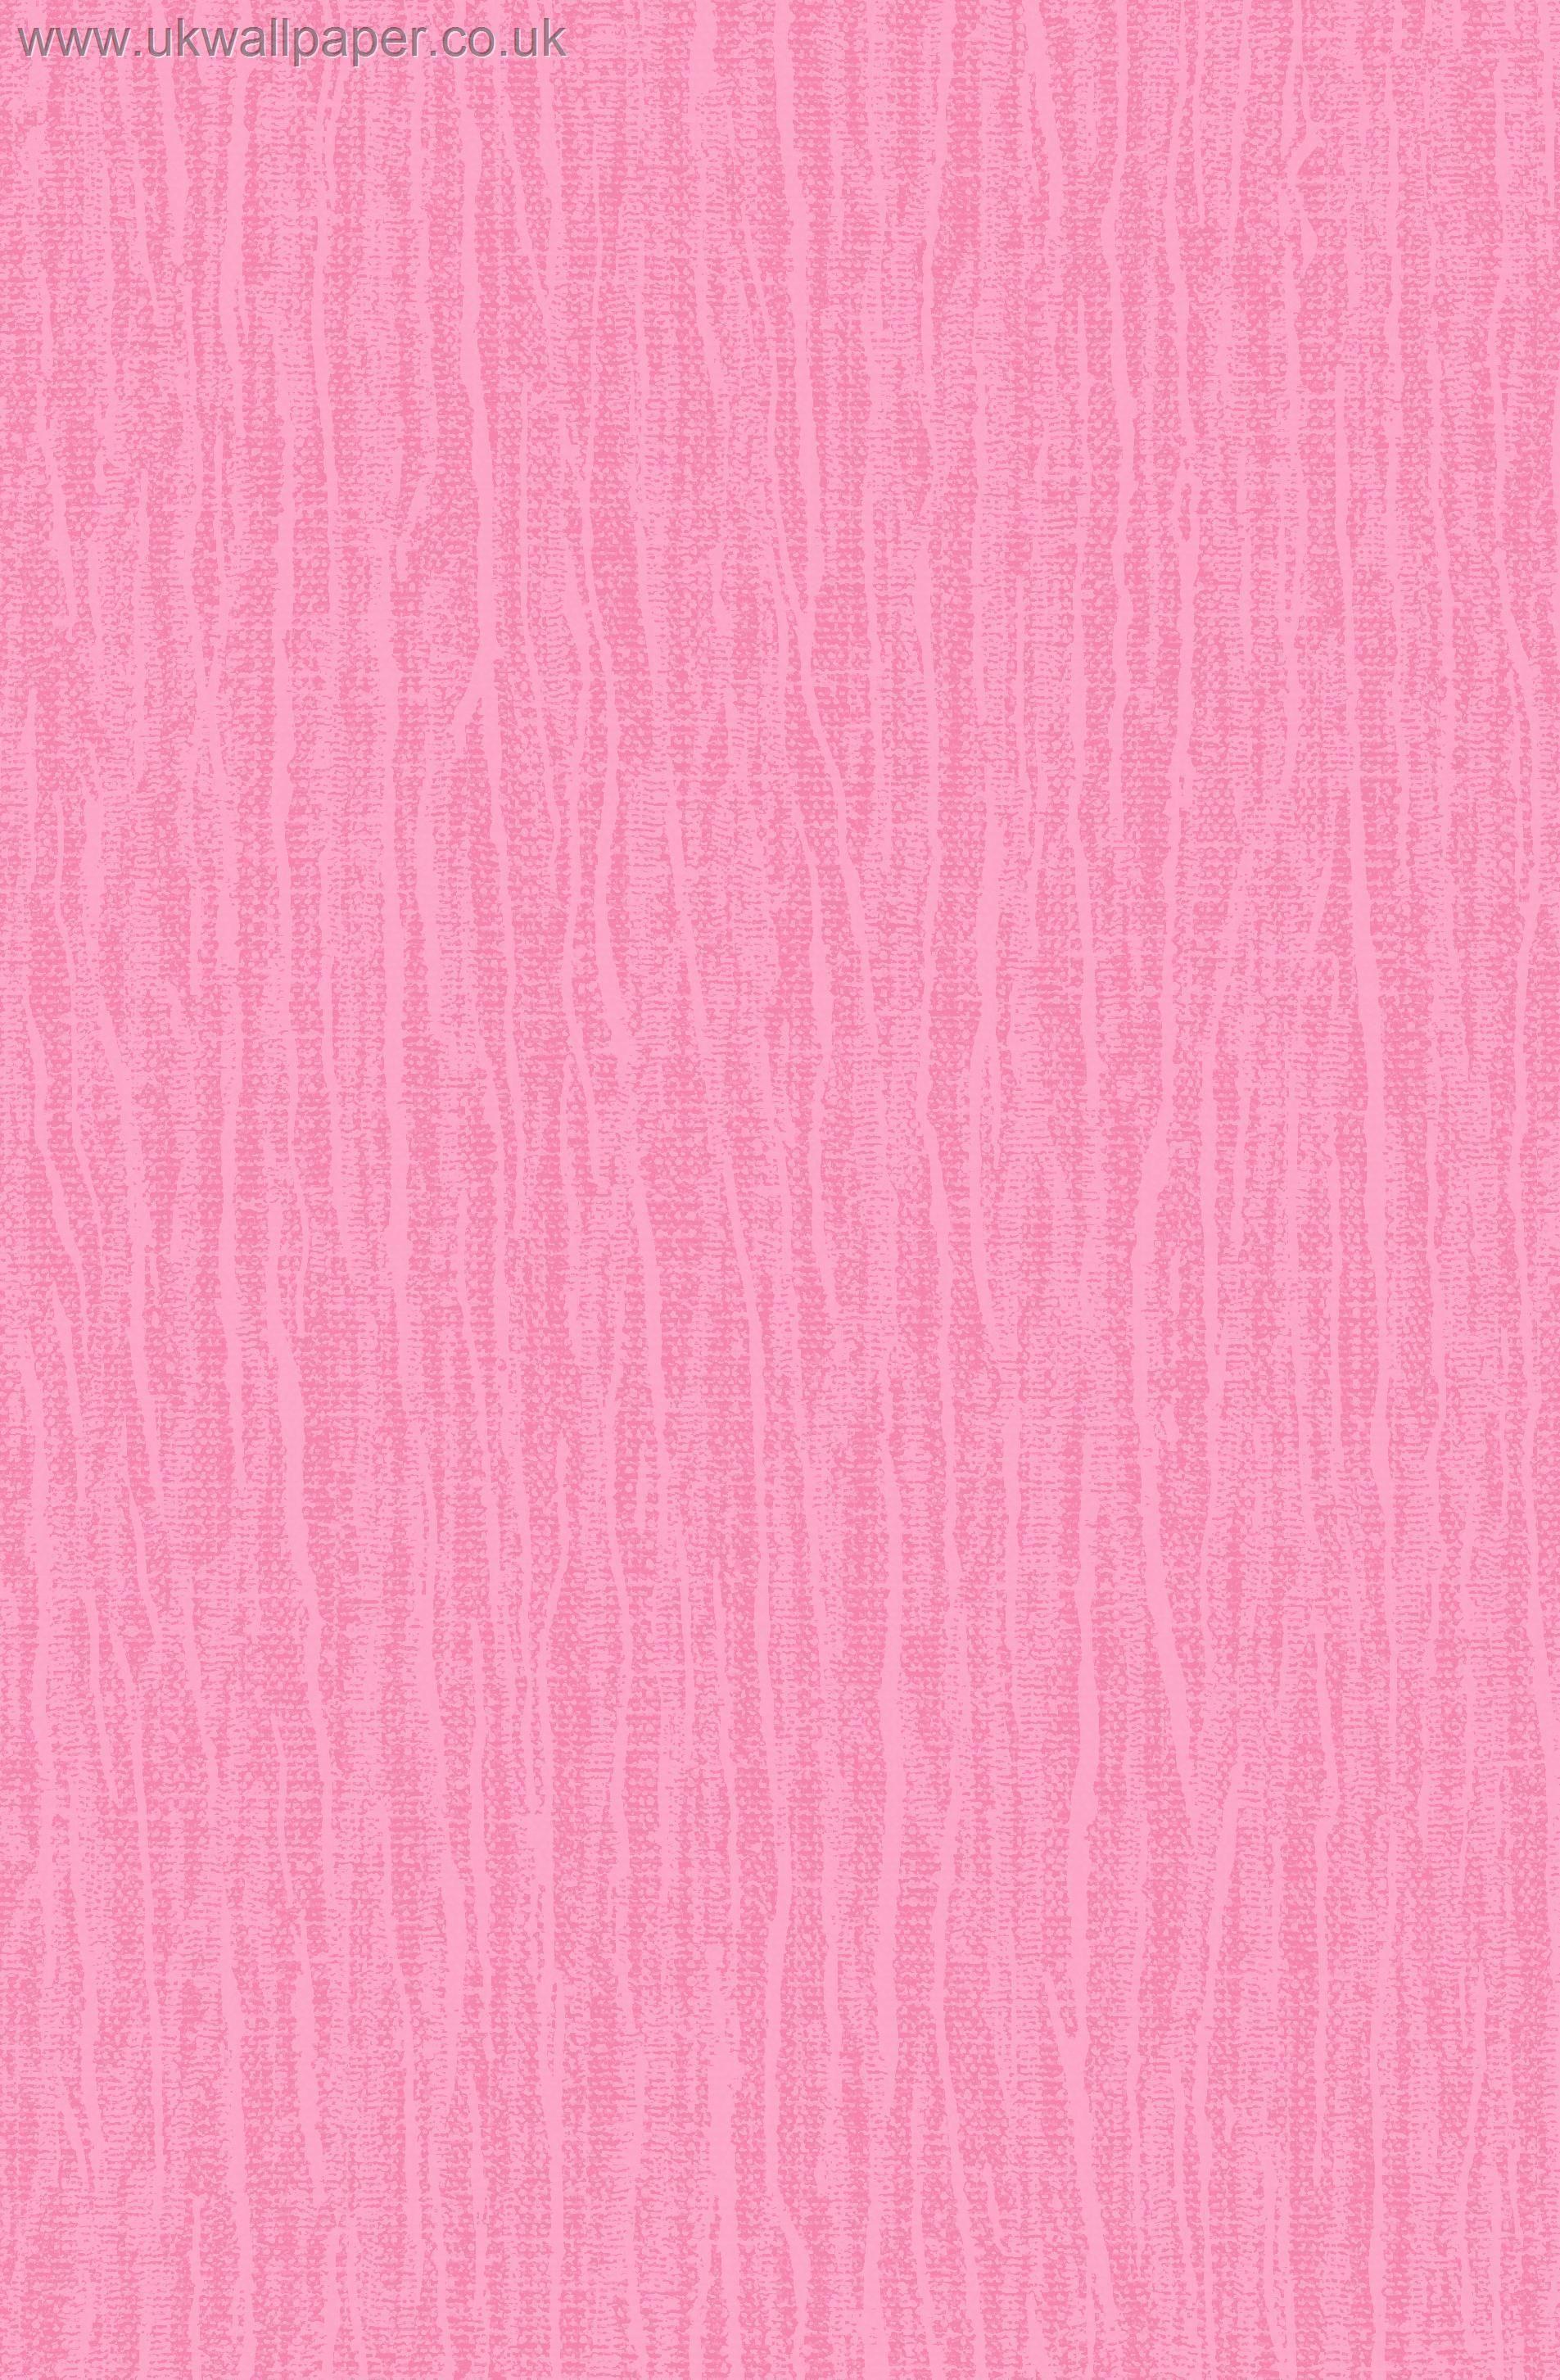 Wallpapers Pink Soft - Wallpaper Cave